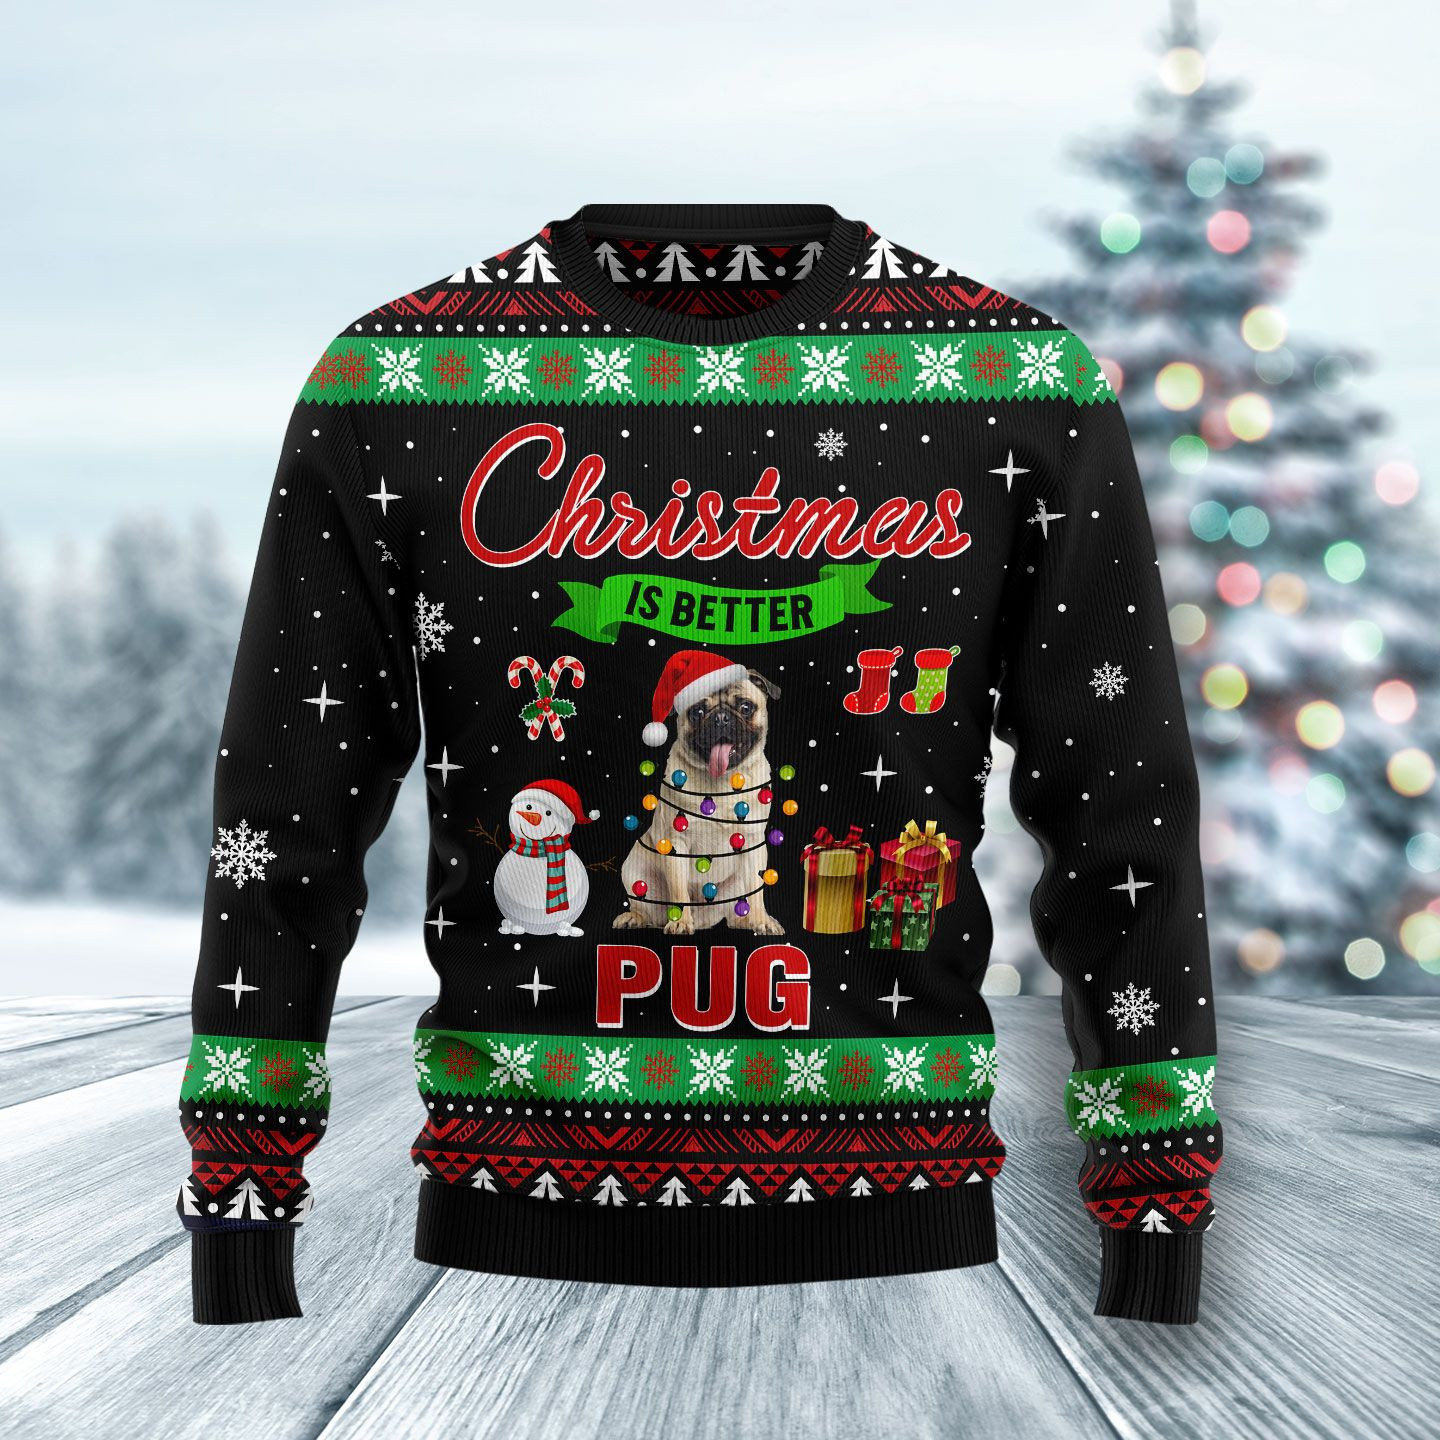 Christmas Is Better With Pug Ugly Christmas Sweater Ugly Sweater For Men Women, Holiday Sweater